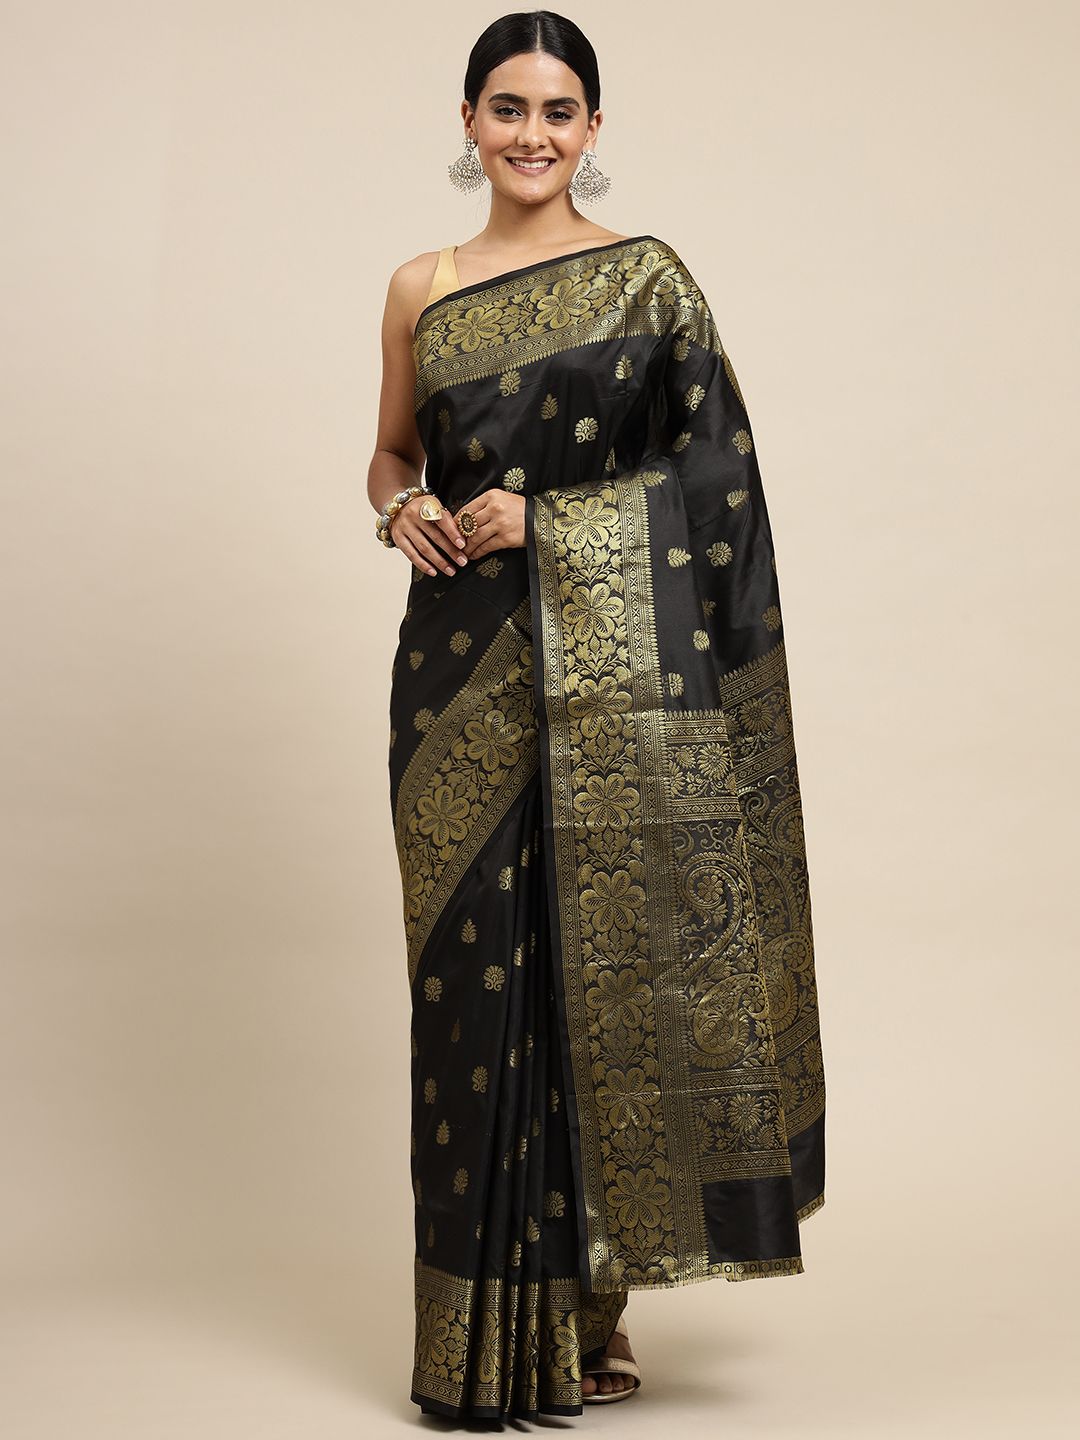 Black color everyday were paithani saree for woman